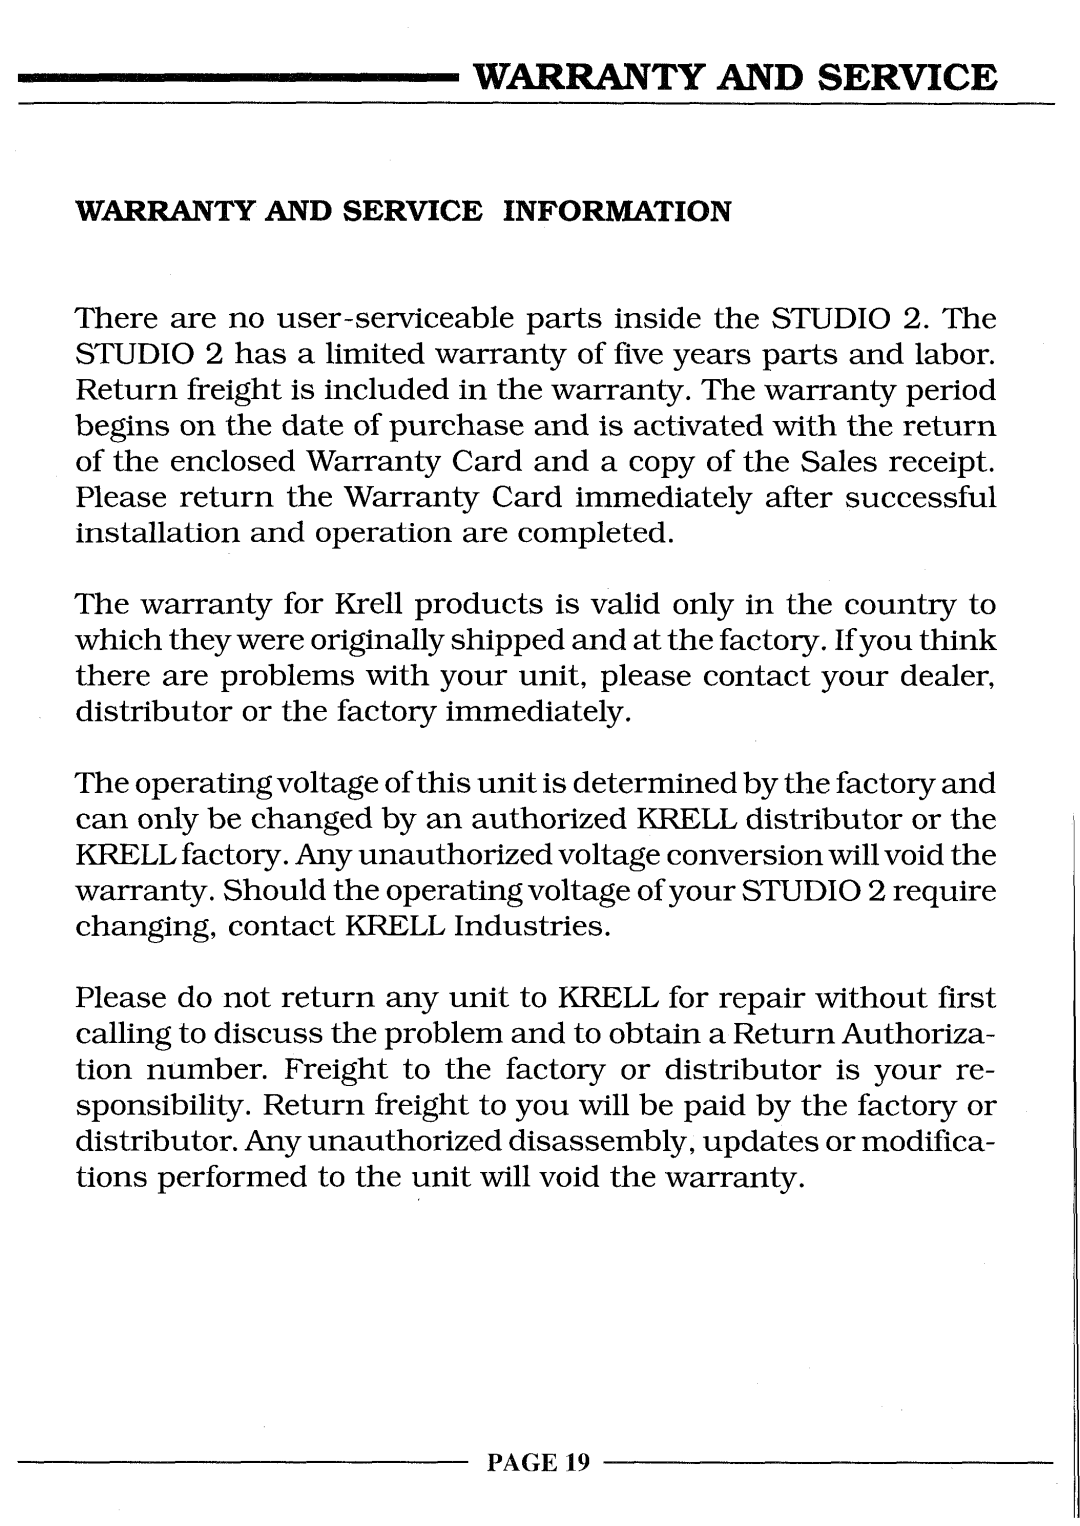 Krell Industries STUDIO 2 manual Warranty And Service Information 